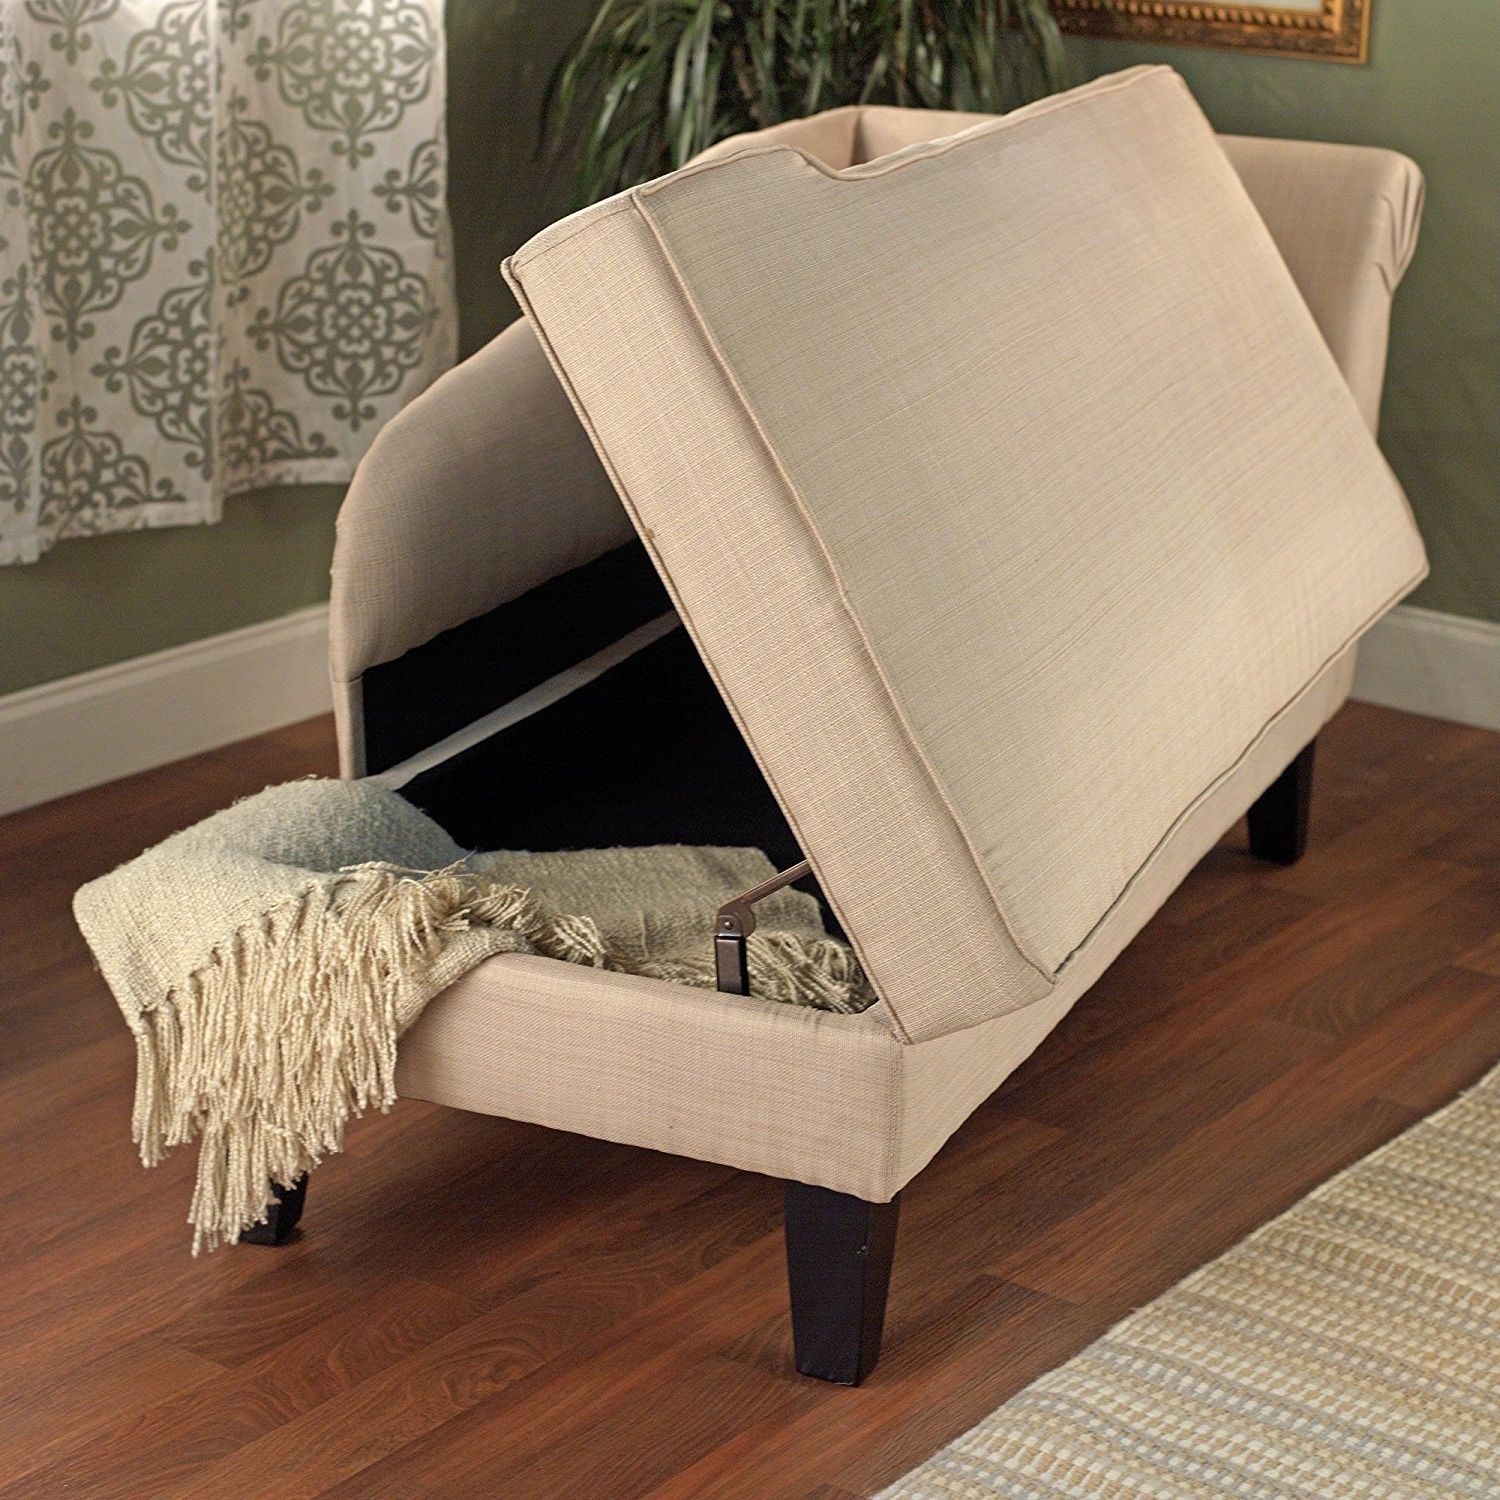 Storage Chaise Lounges In Favorite Amazon: Tms Leena Storage Chaise, Beige: Kitchen & Dining (View 1 of 15)